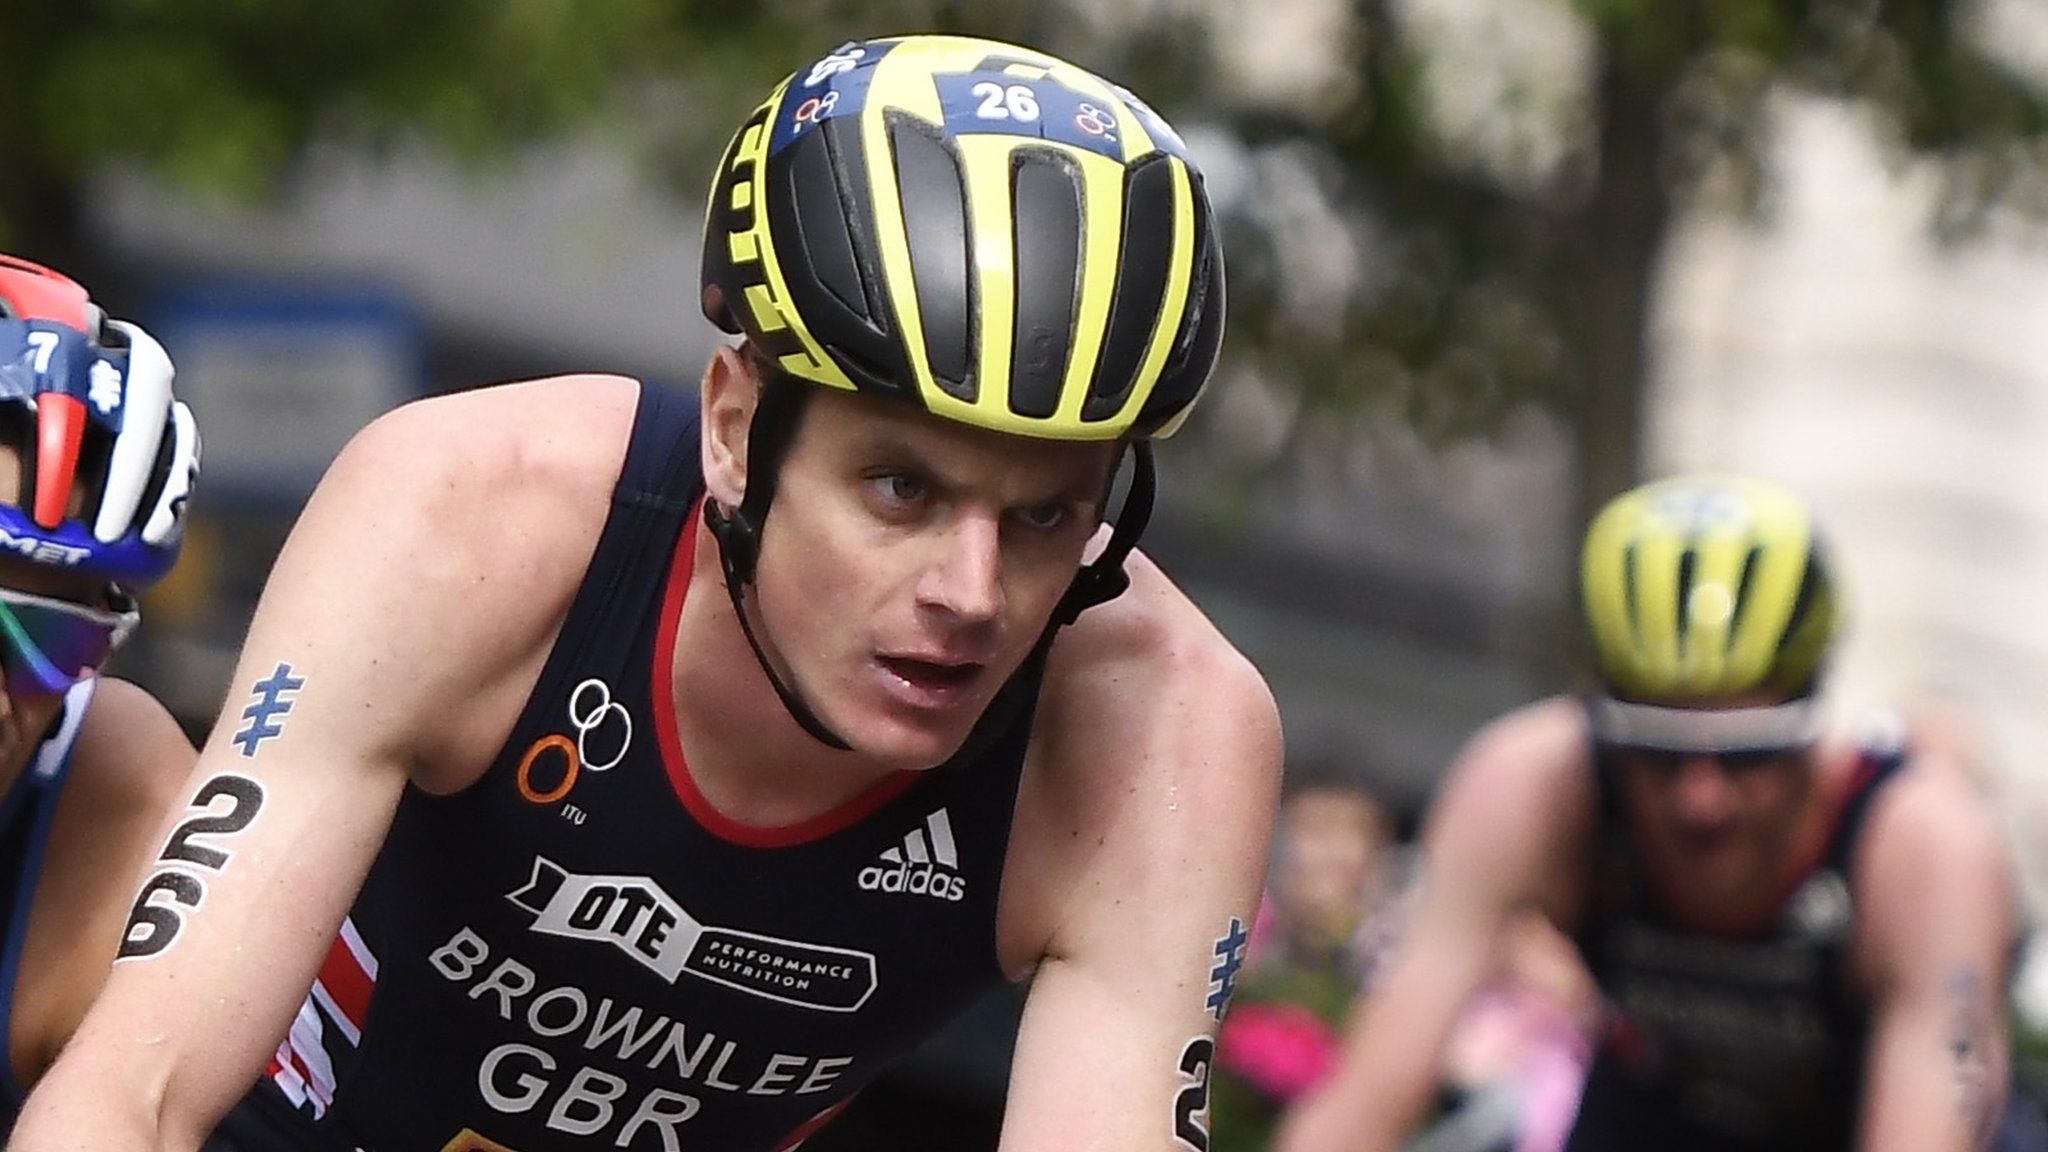 Jonathan Brownlee pictured during the World Triathlon Series event in Leeds